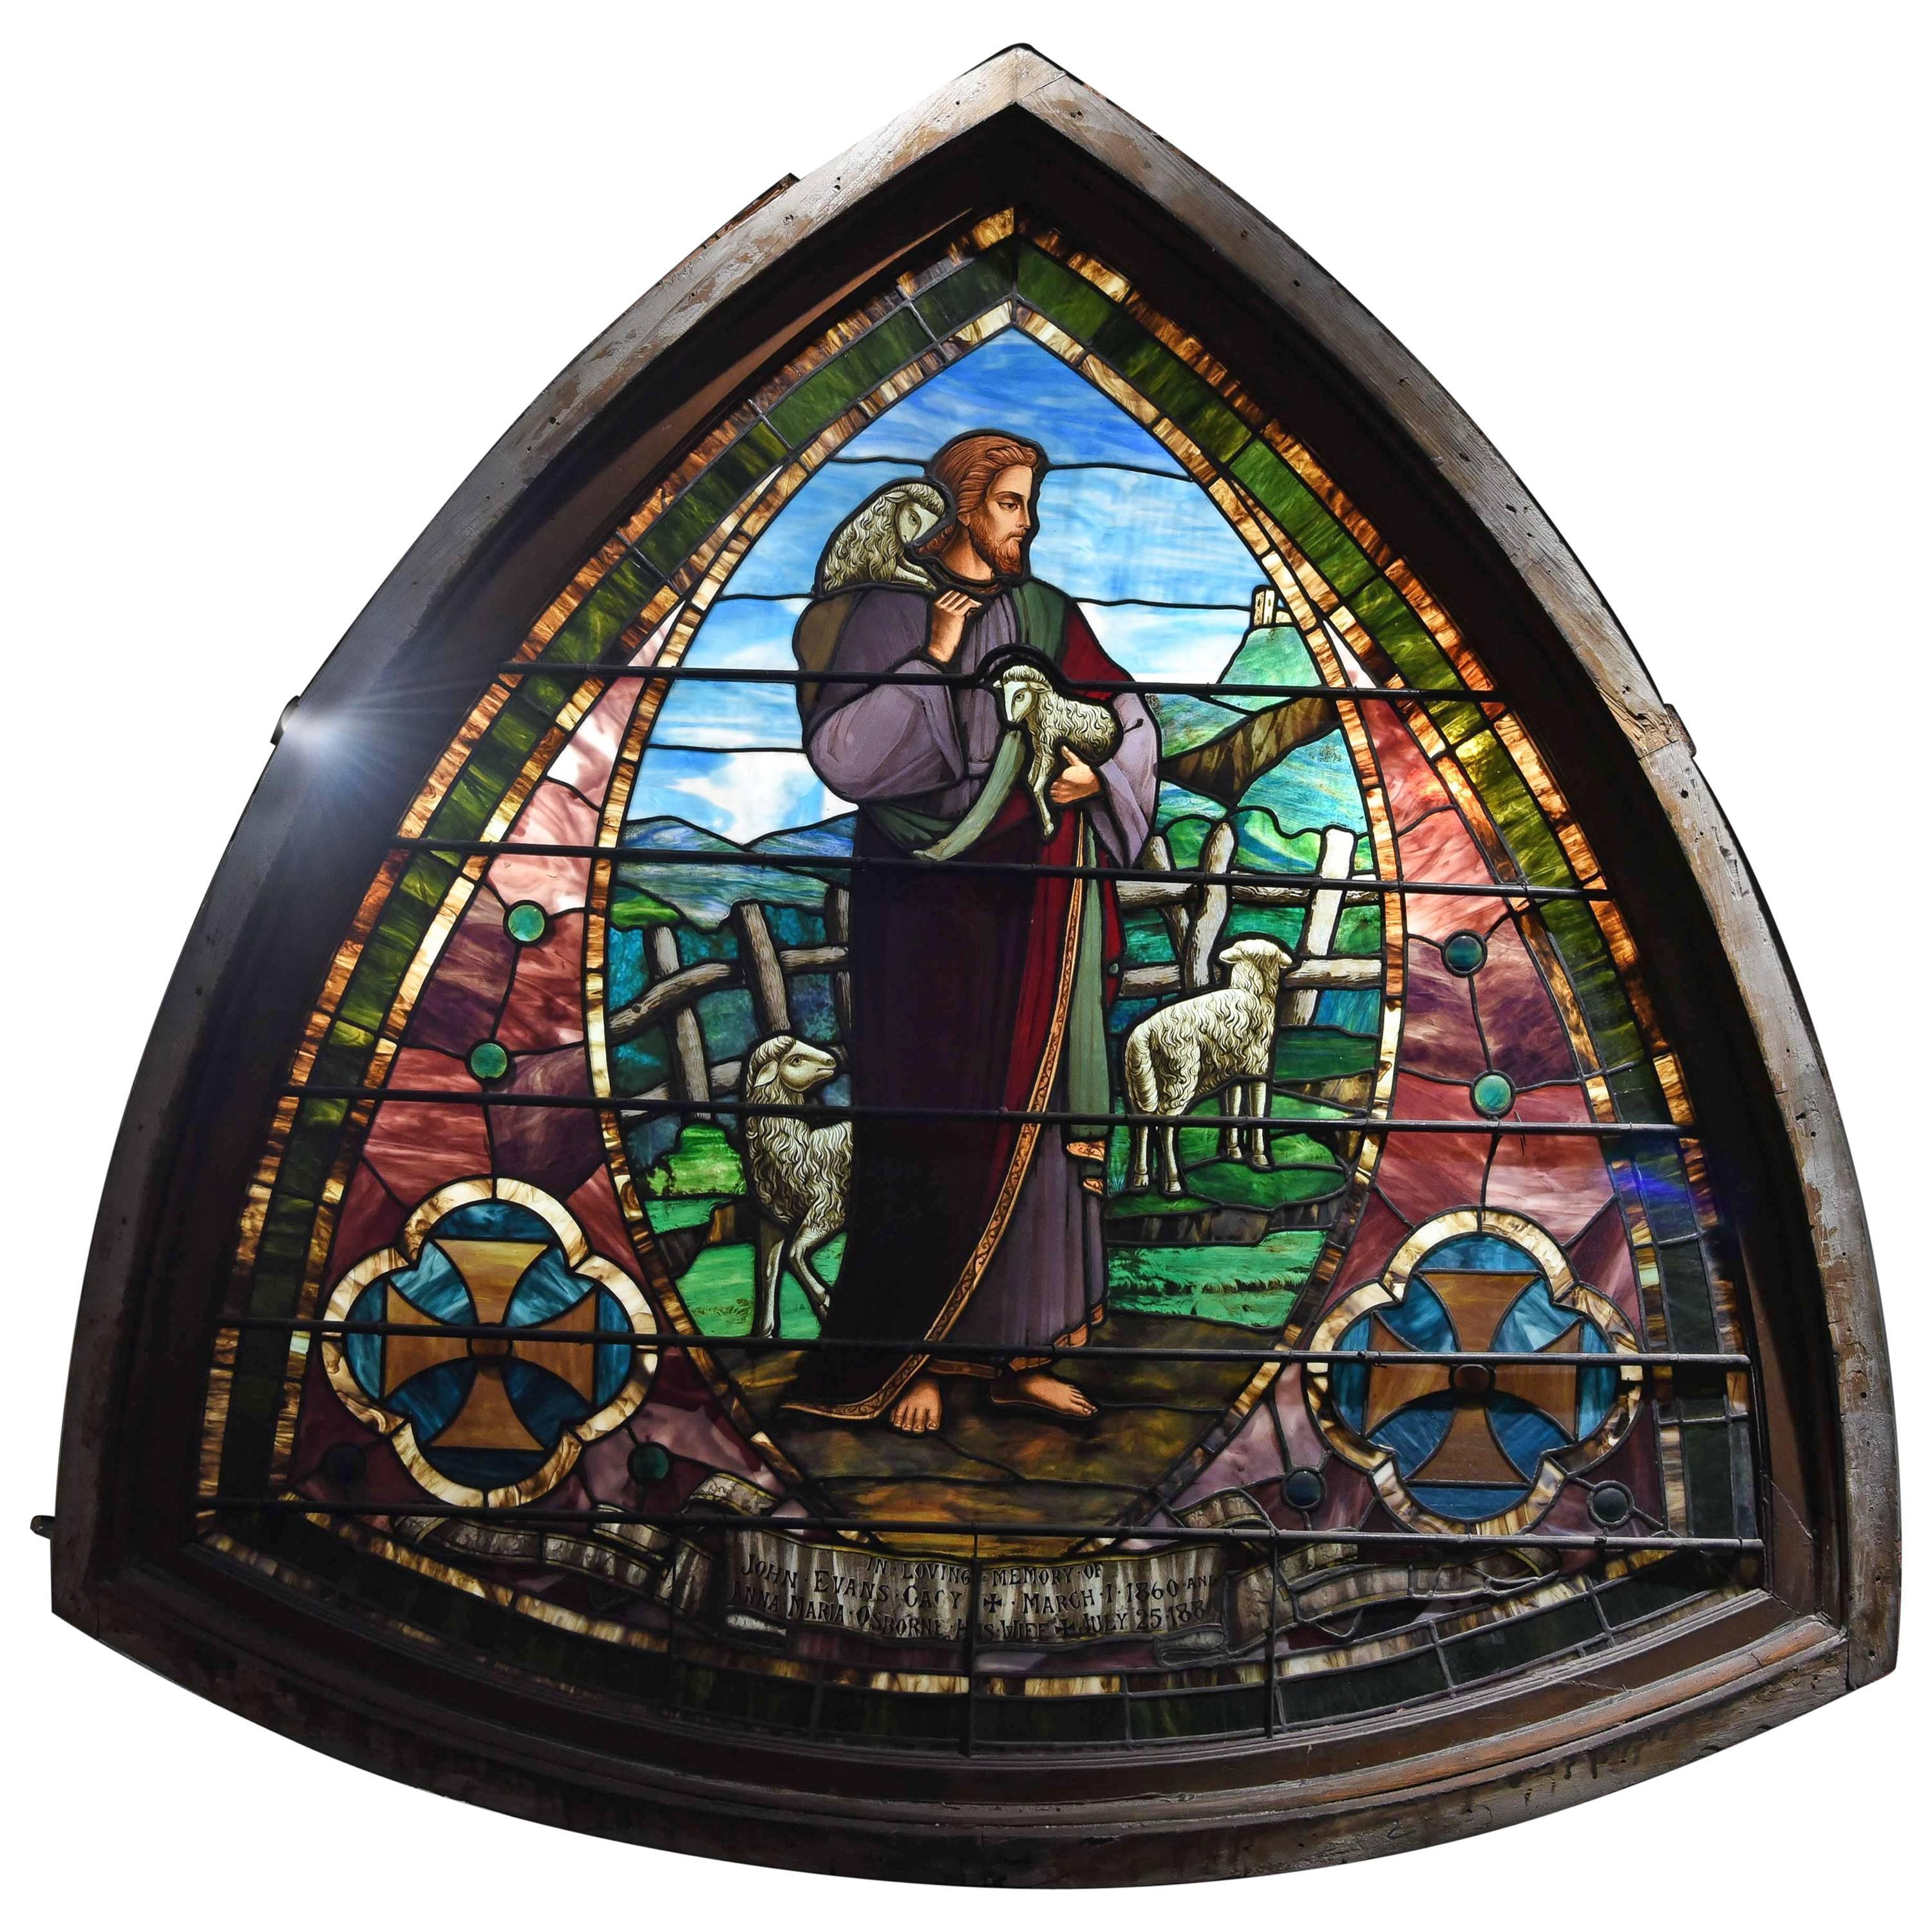 Monumental Stained Glass Pictoral Window, circa 1880